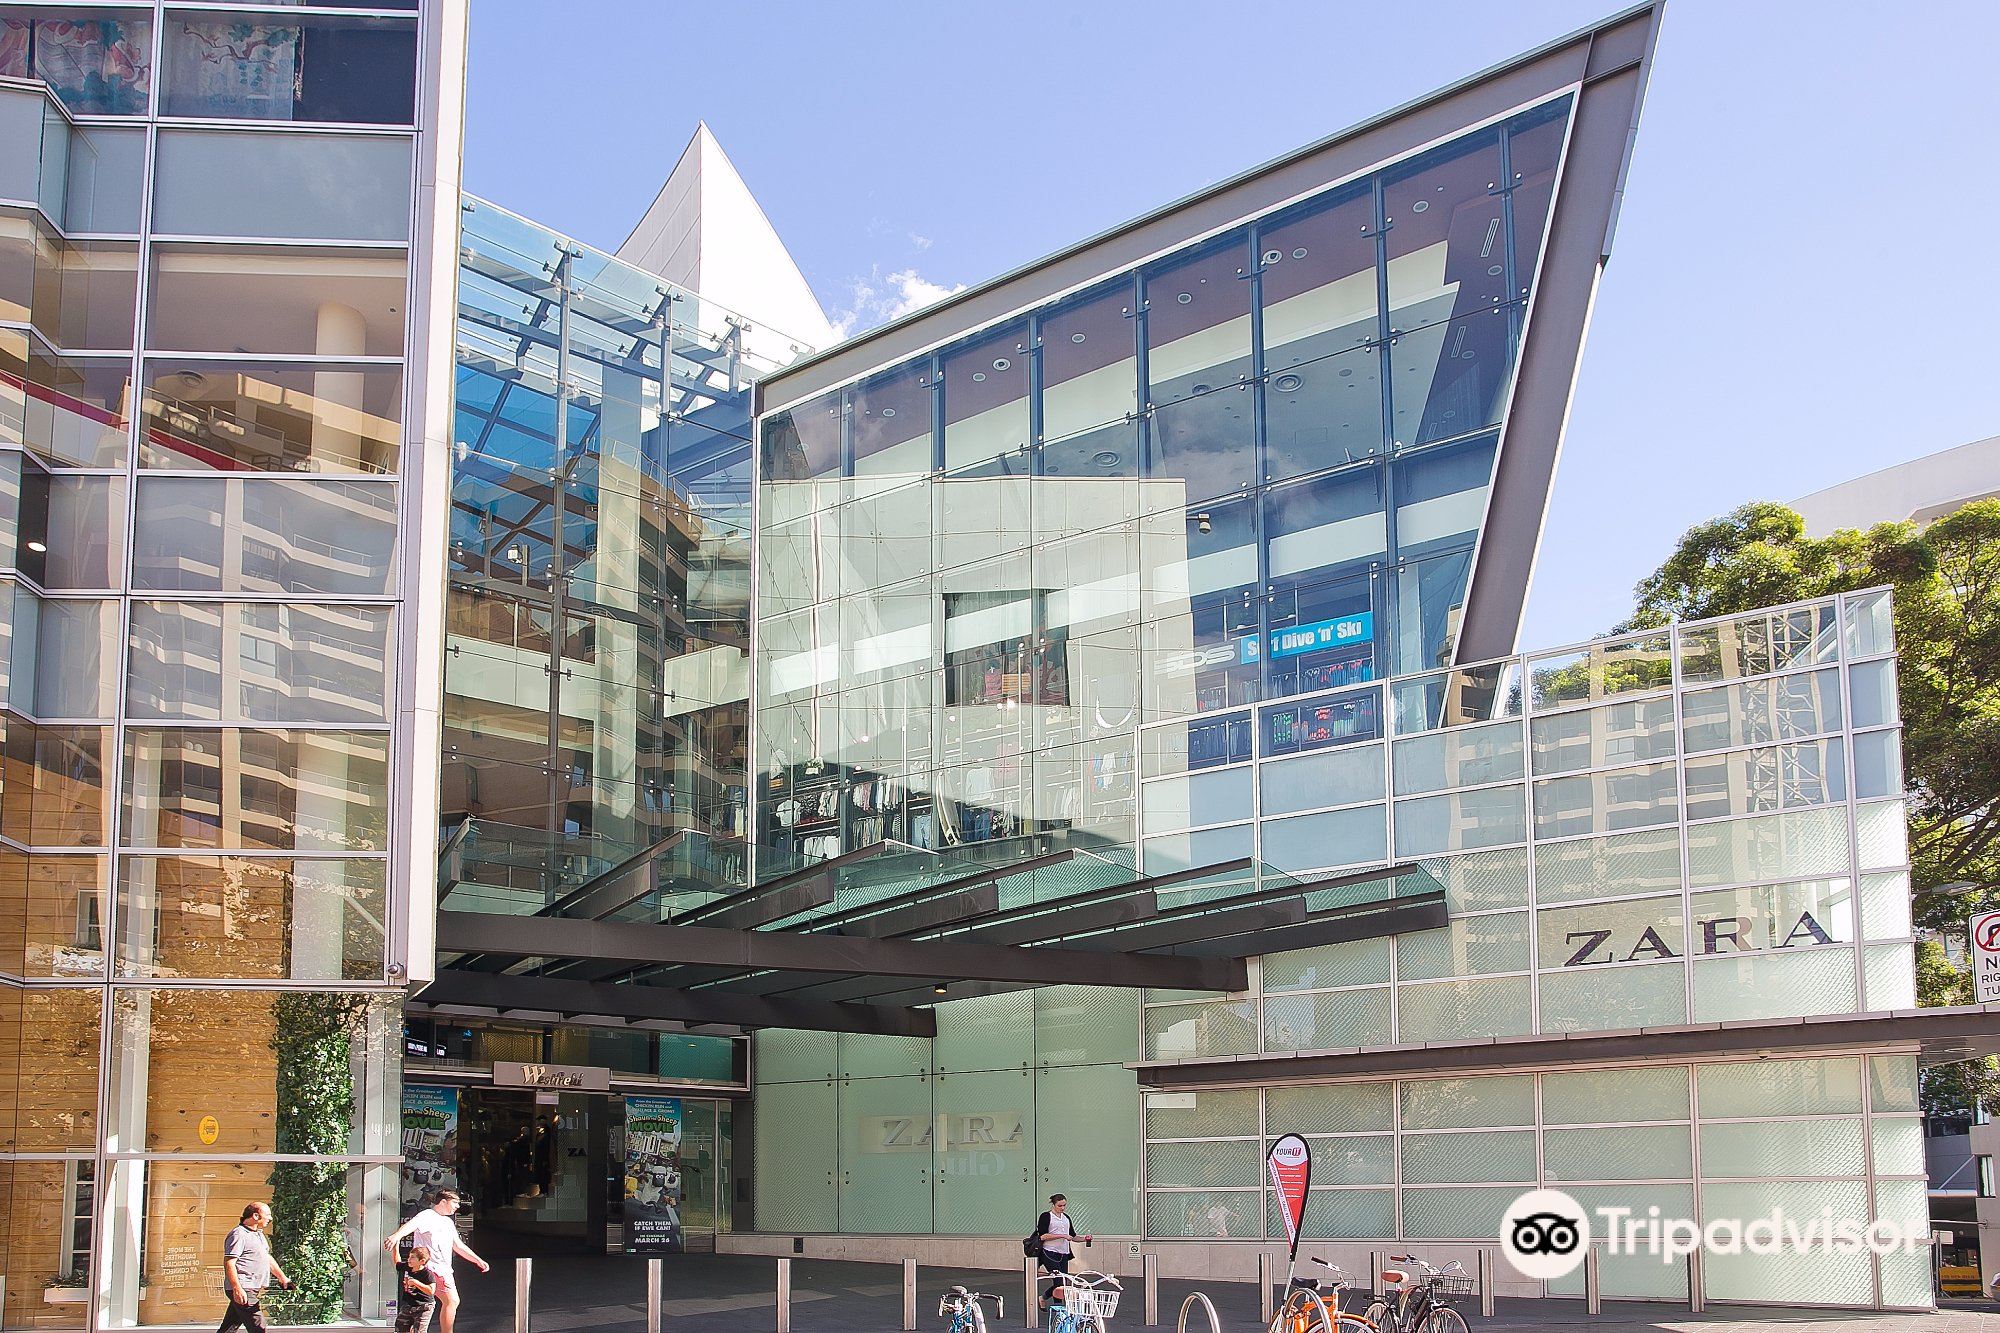 Shopping itineraries in Westfield Bondi Junction in August